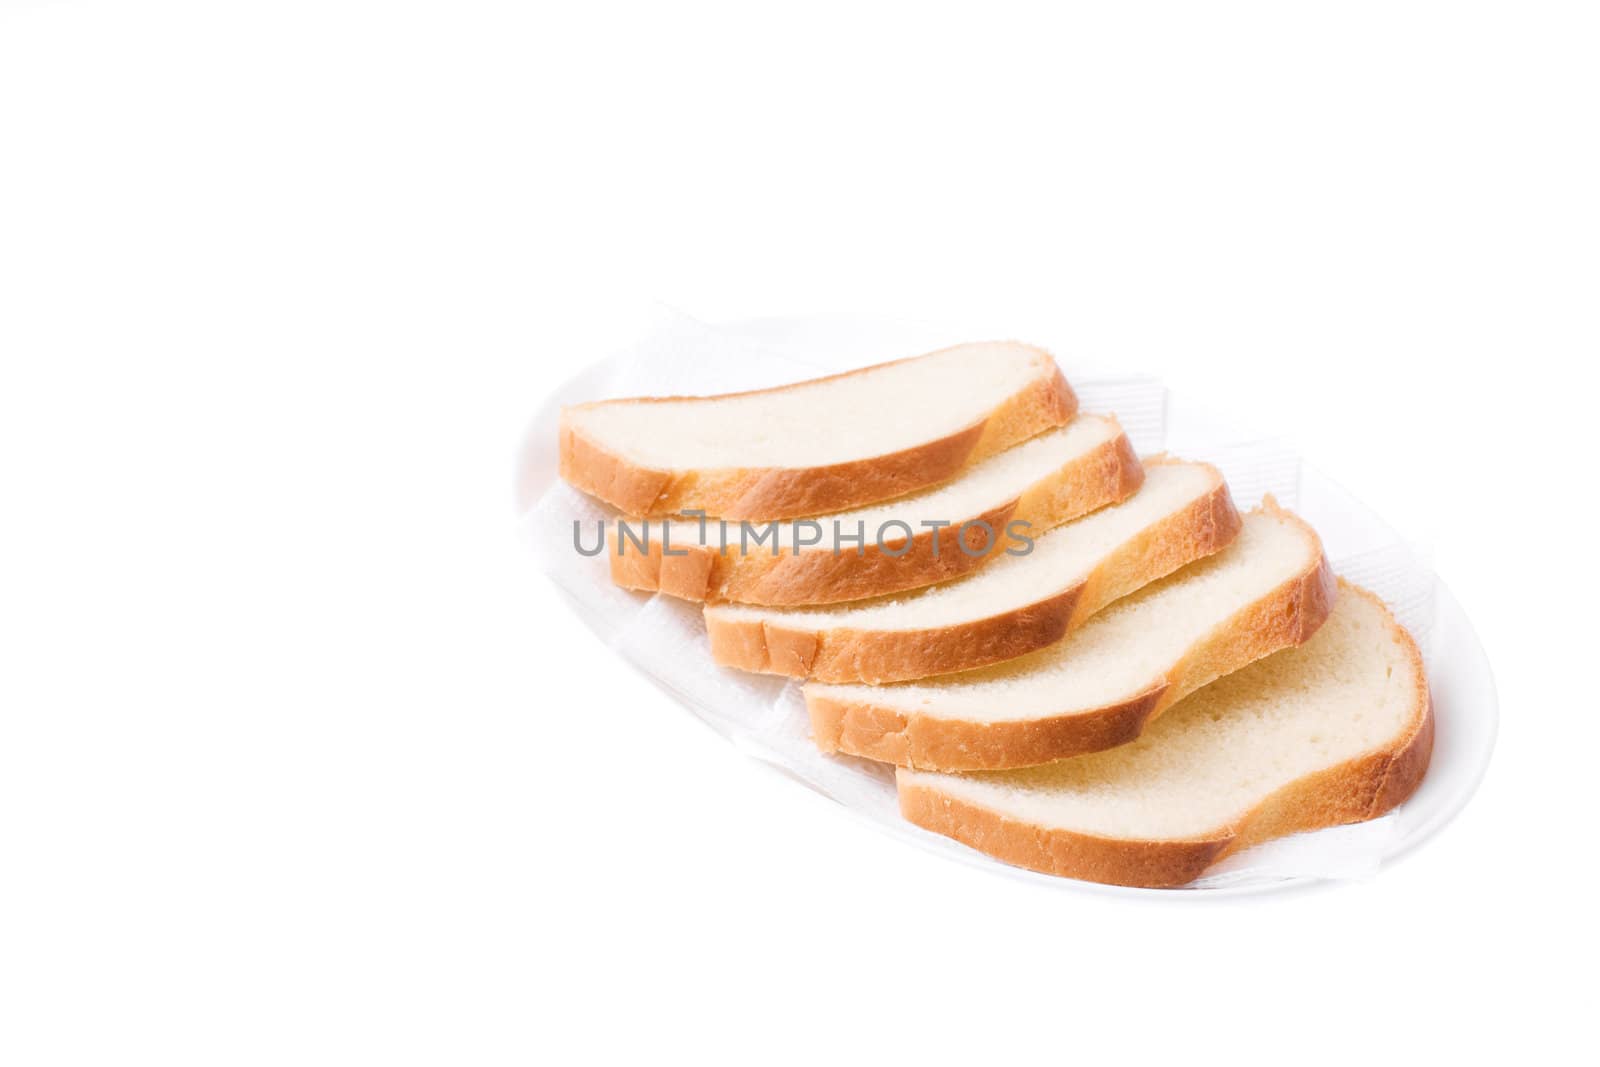 Sliced Bread on the plate isolated over white. Bon appetit!